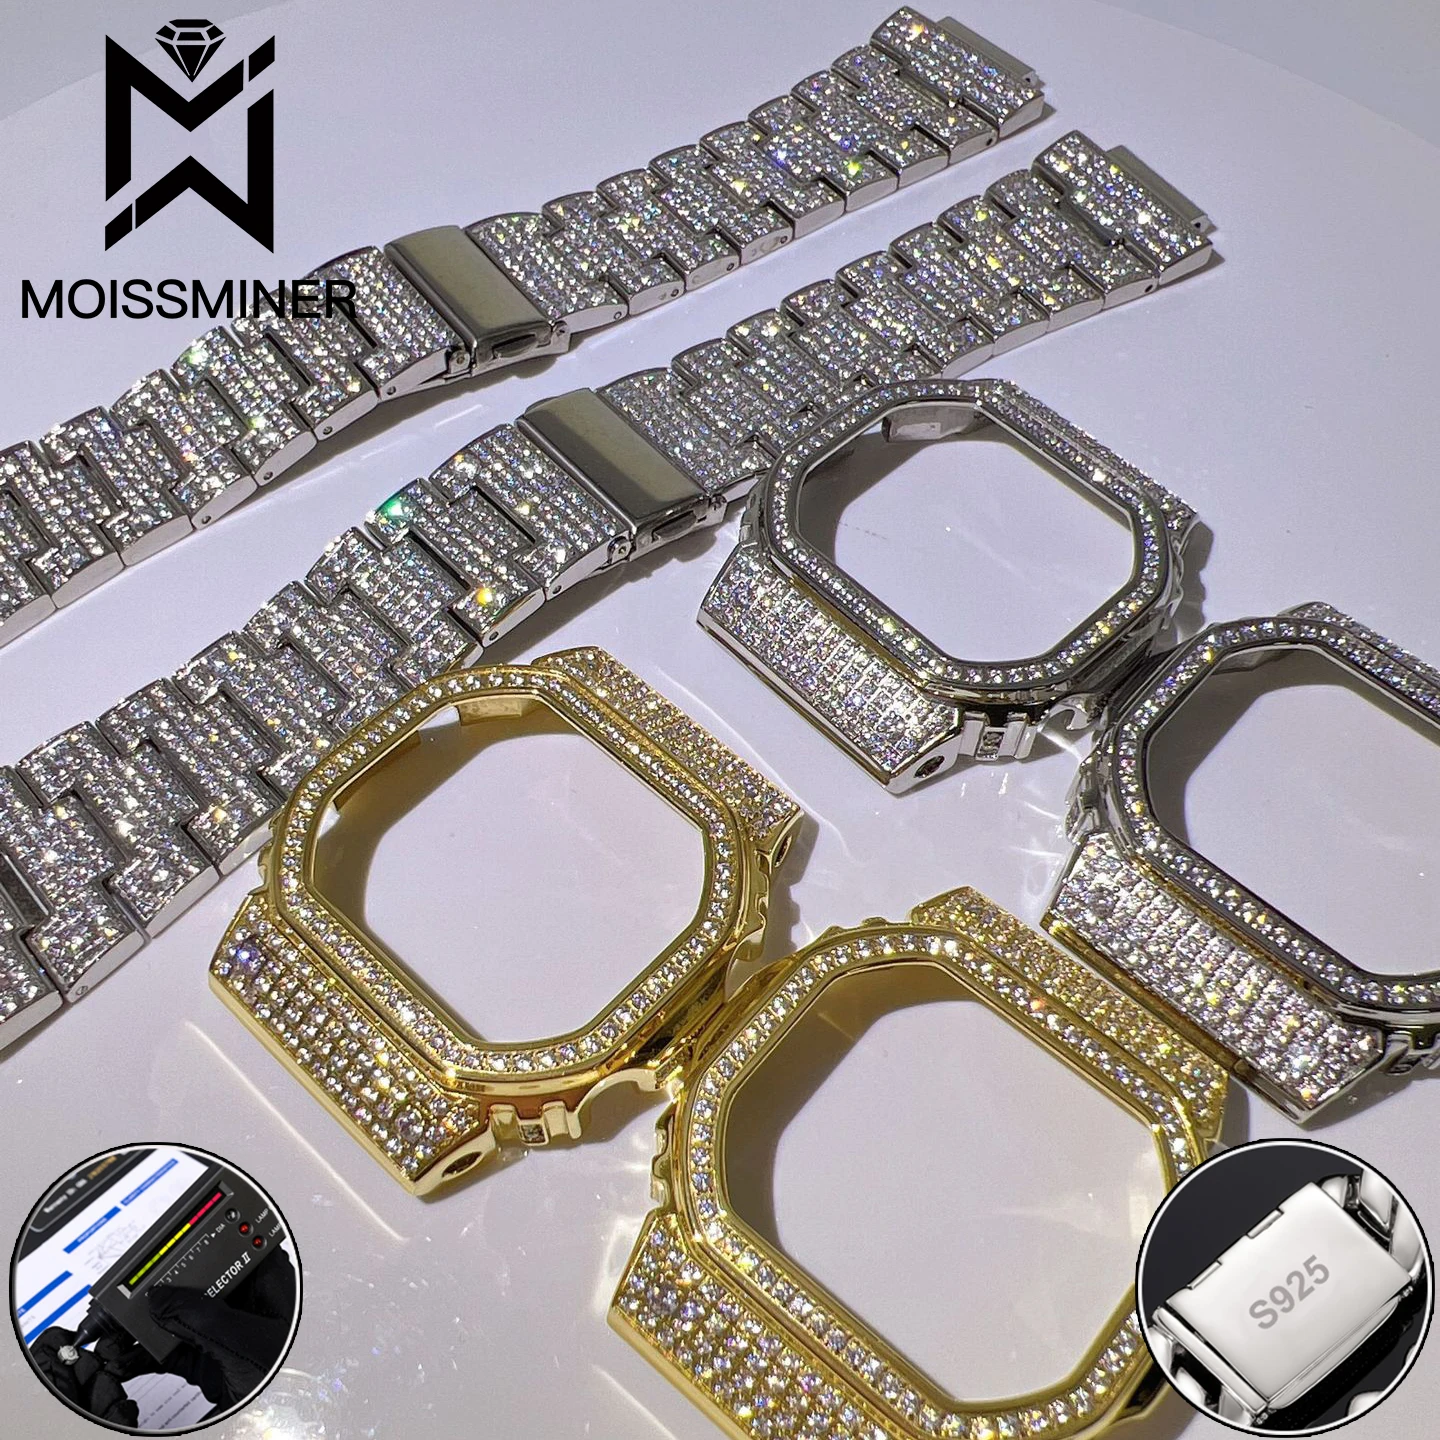 Real Moissanite Watch Strap and Cover Set For CASI* 5600 Full S925 Silver Real Diamond Can Pass Diamond Tester Wrist Hand Chain